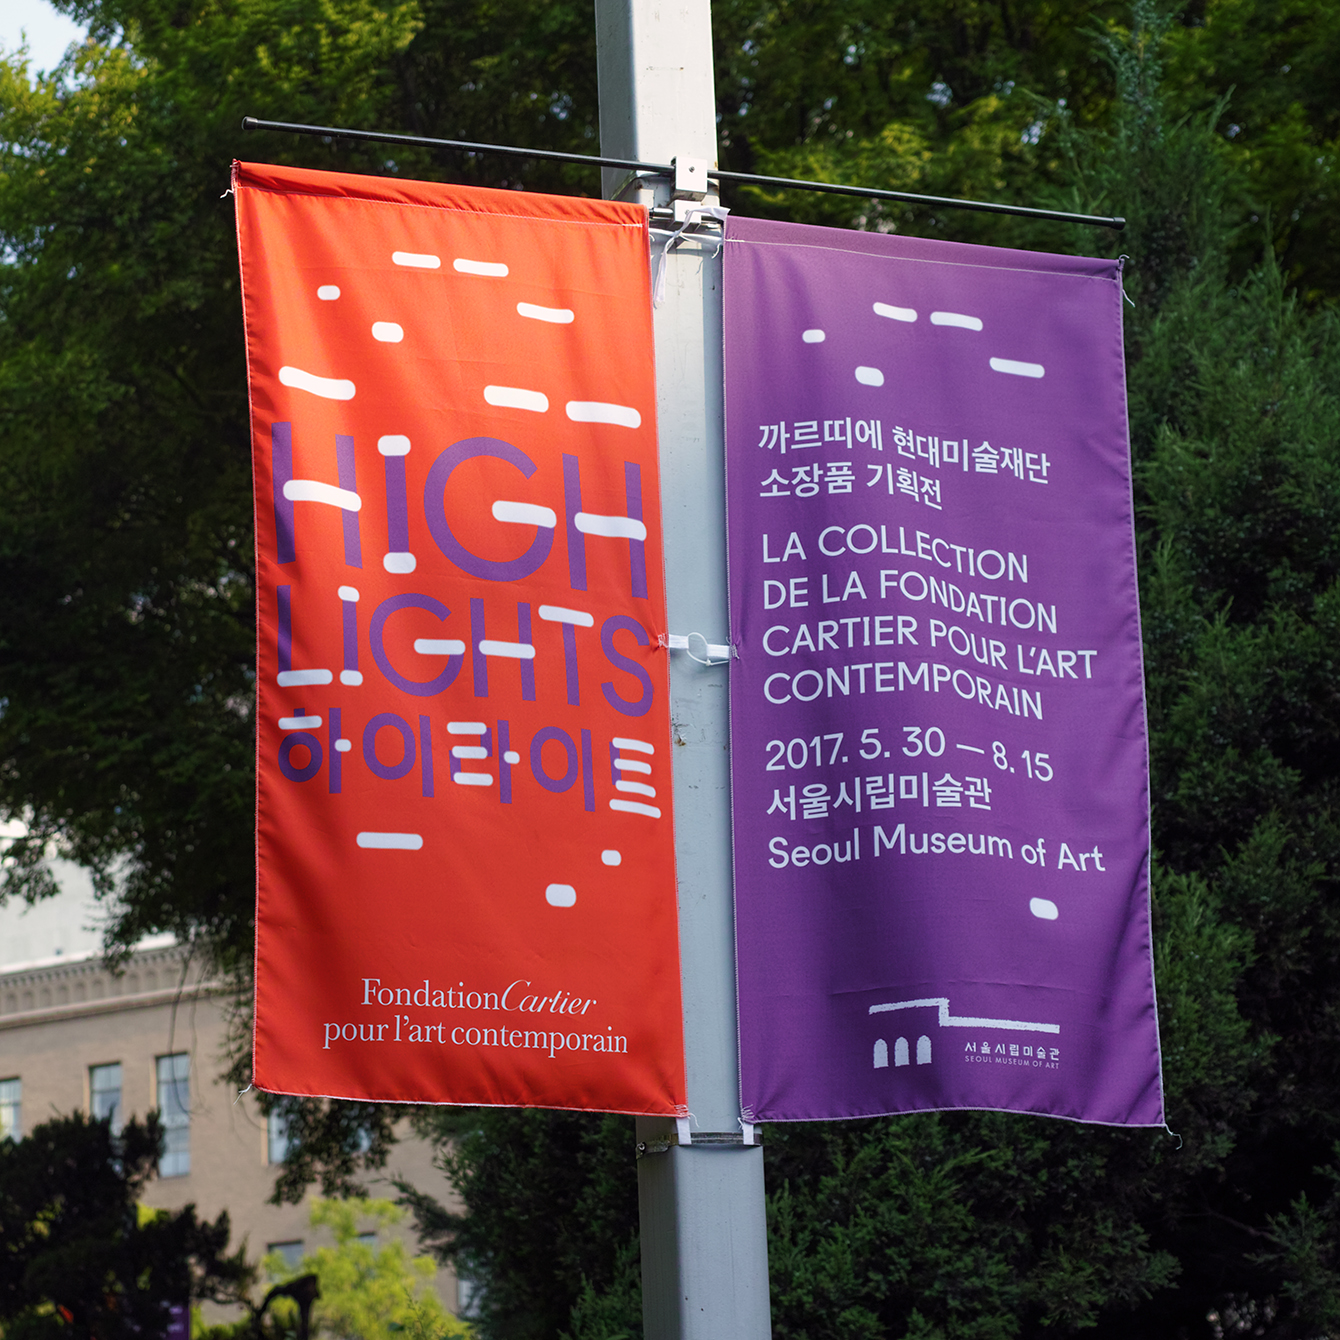 Visual identity and banners by Studio fnt for South Korean art exhibition Highlights at SeMA